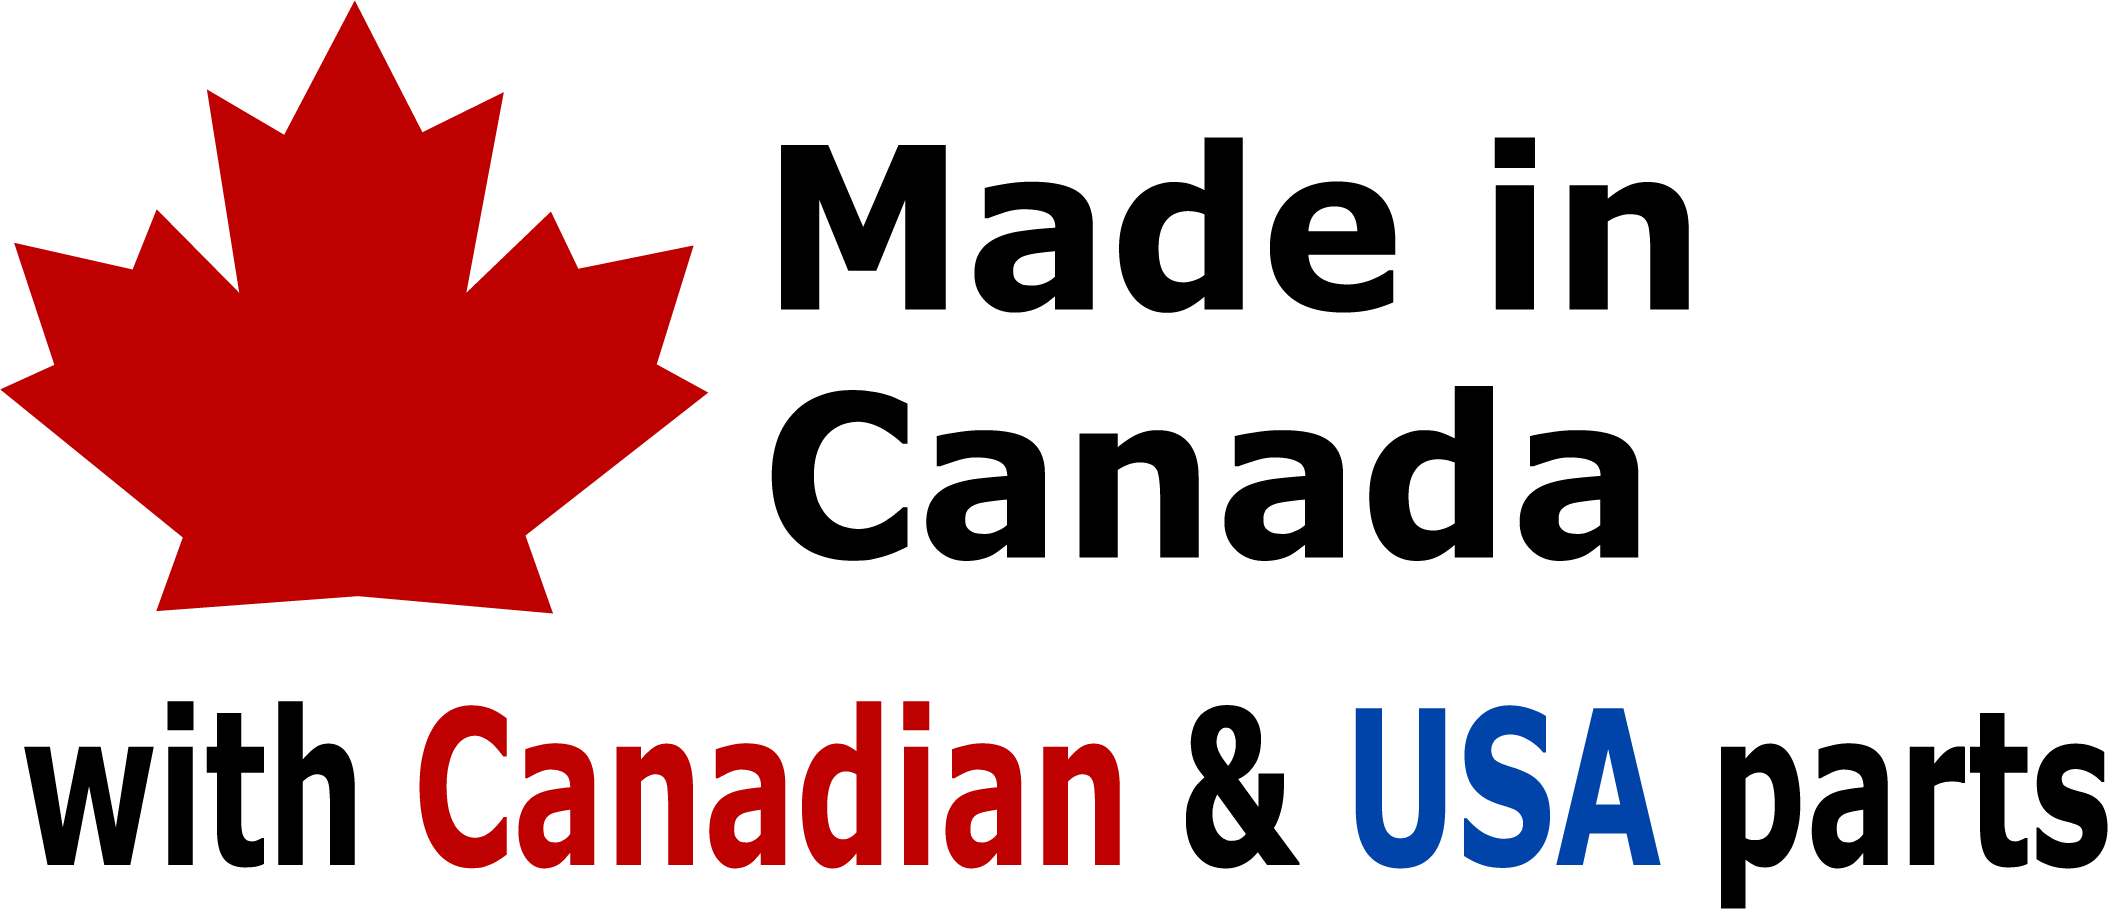 Made in Canada with Canadian and USA parts